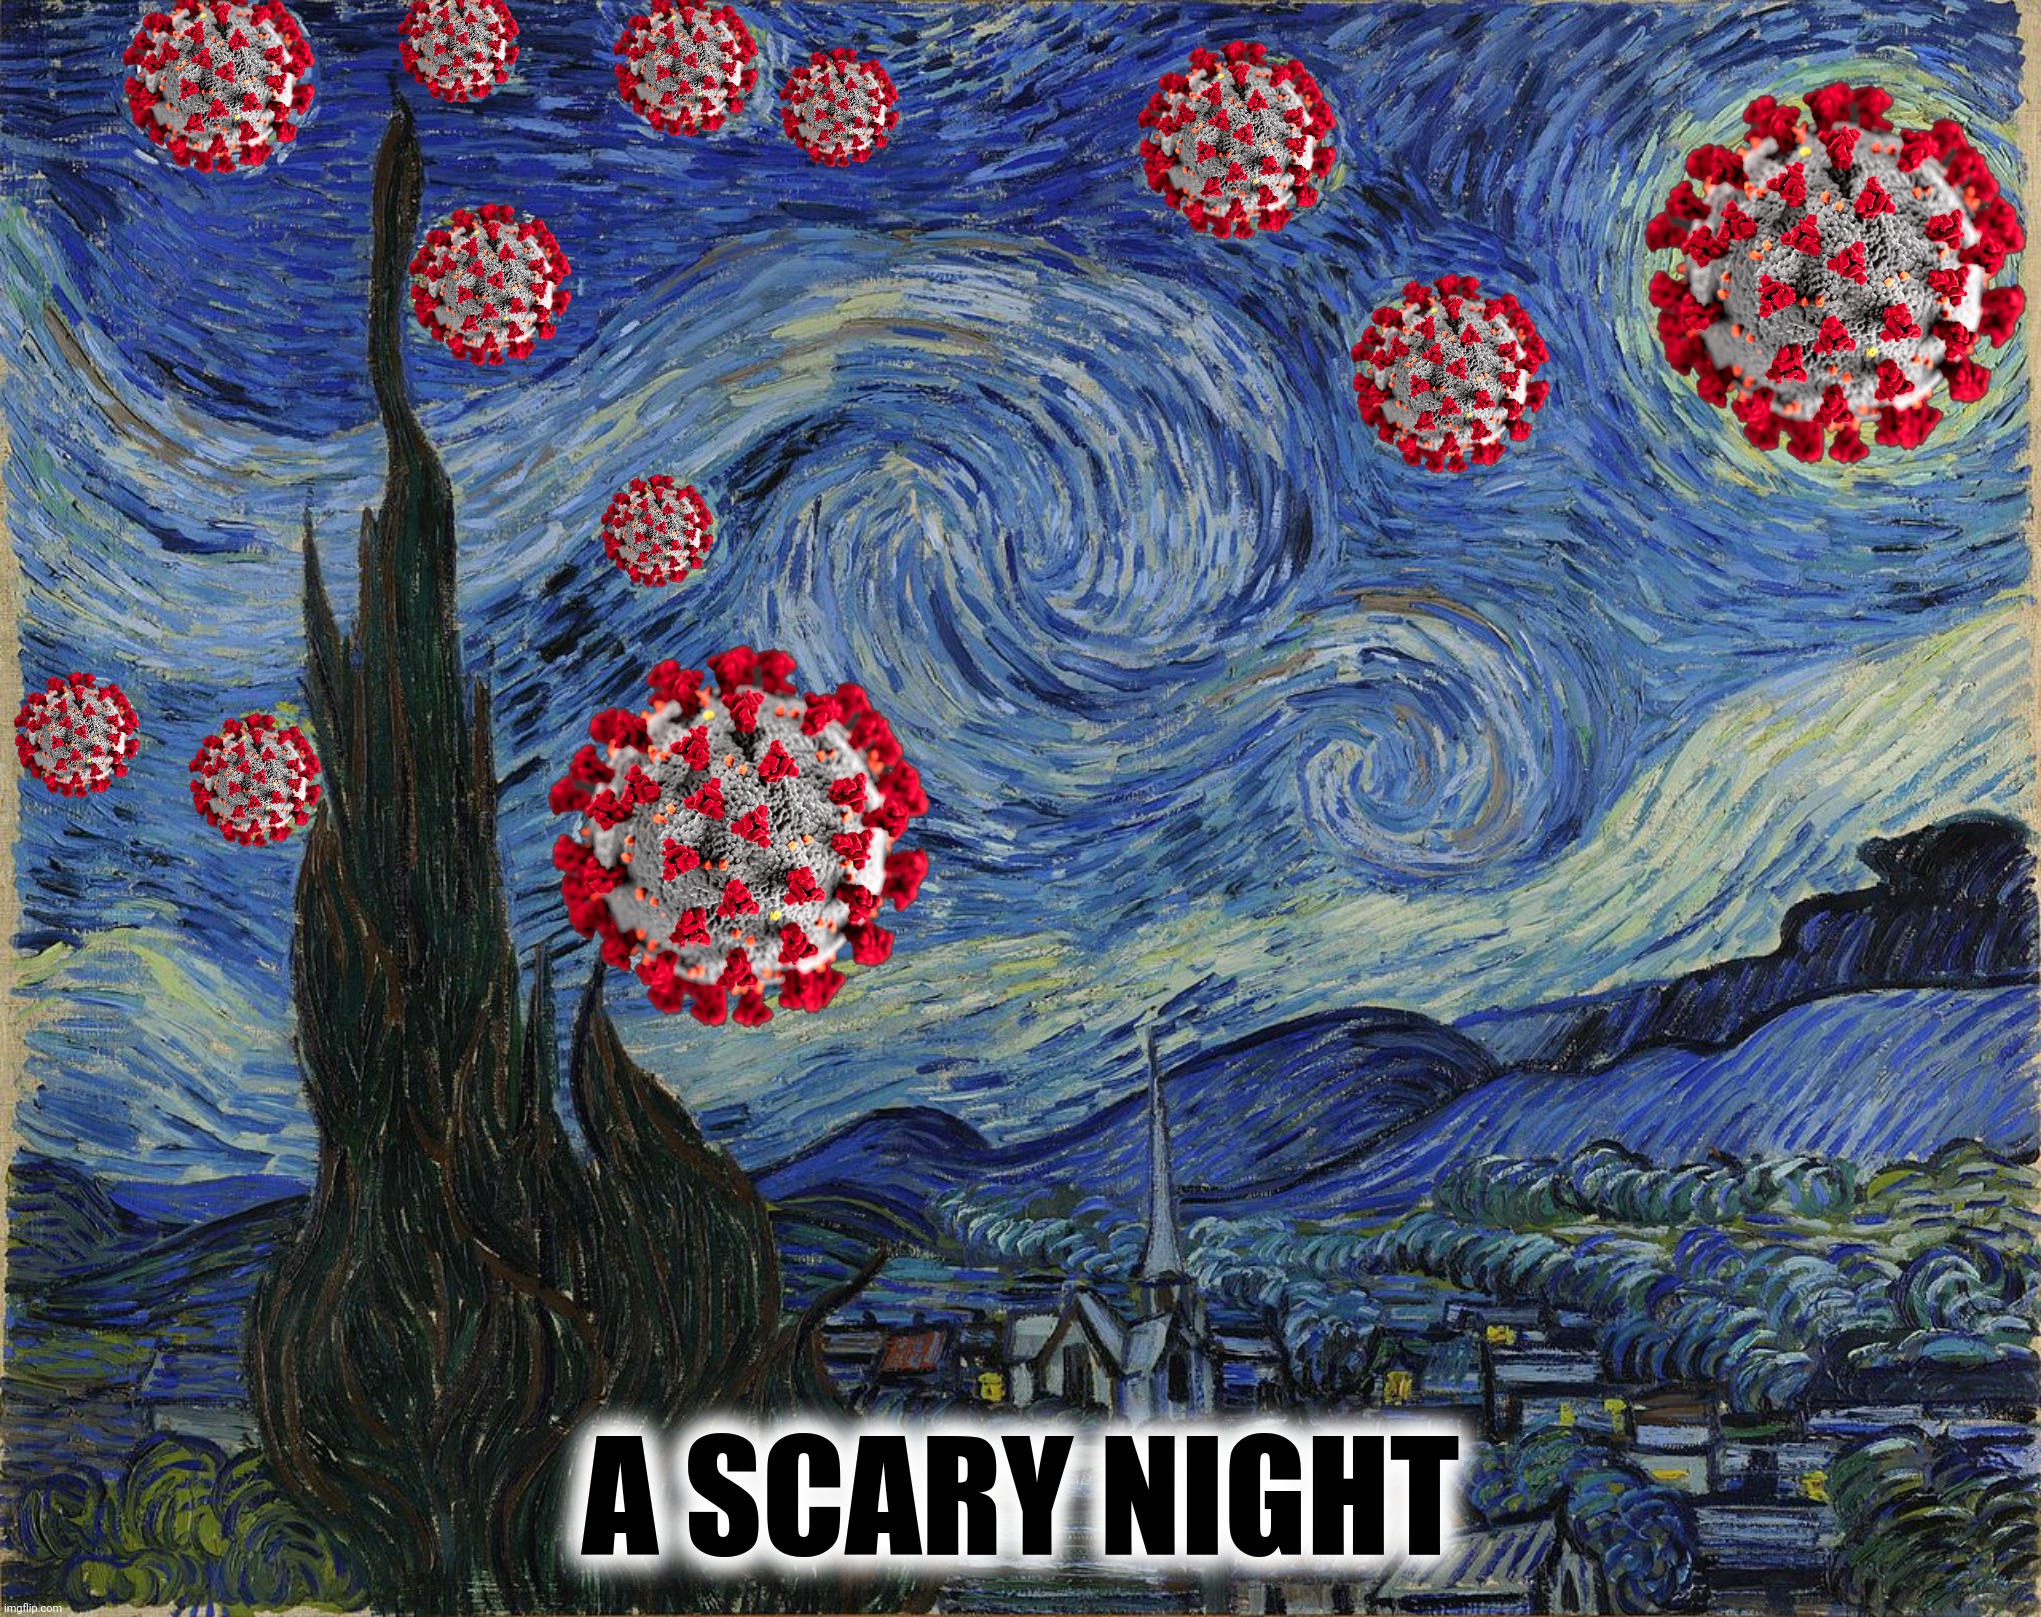 A SCARY NIGHT | made w/ Imgflip meme maker